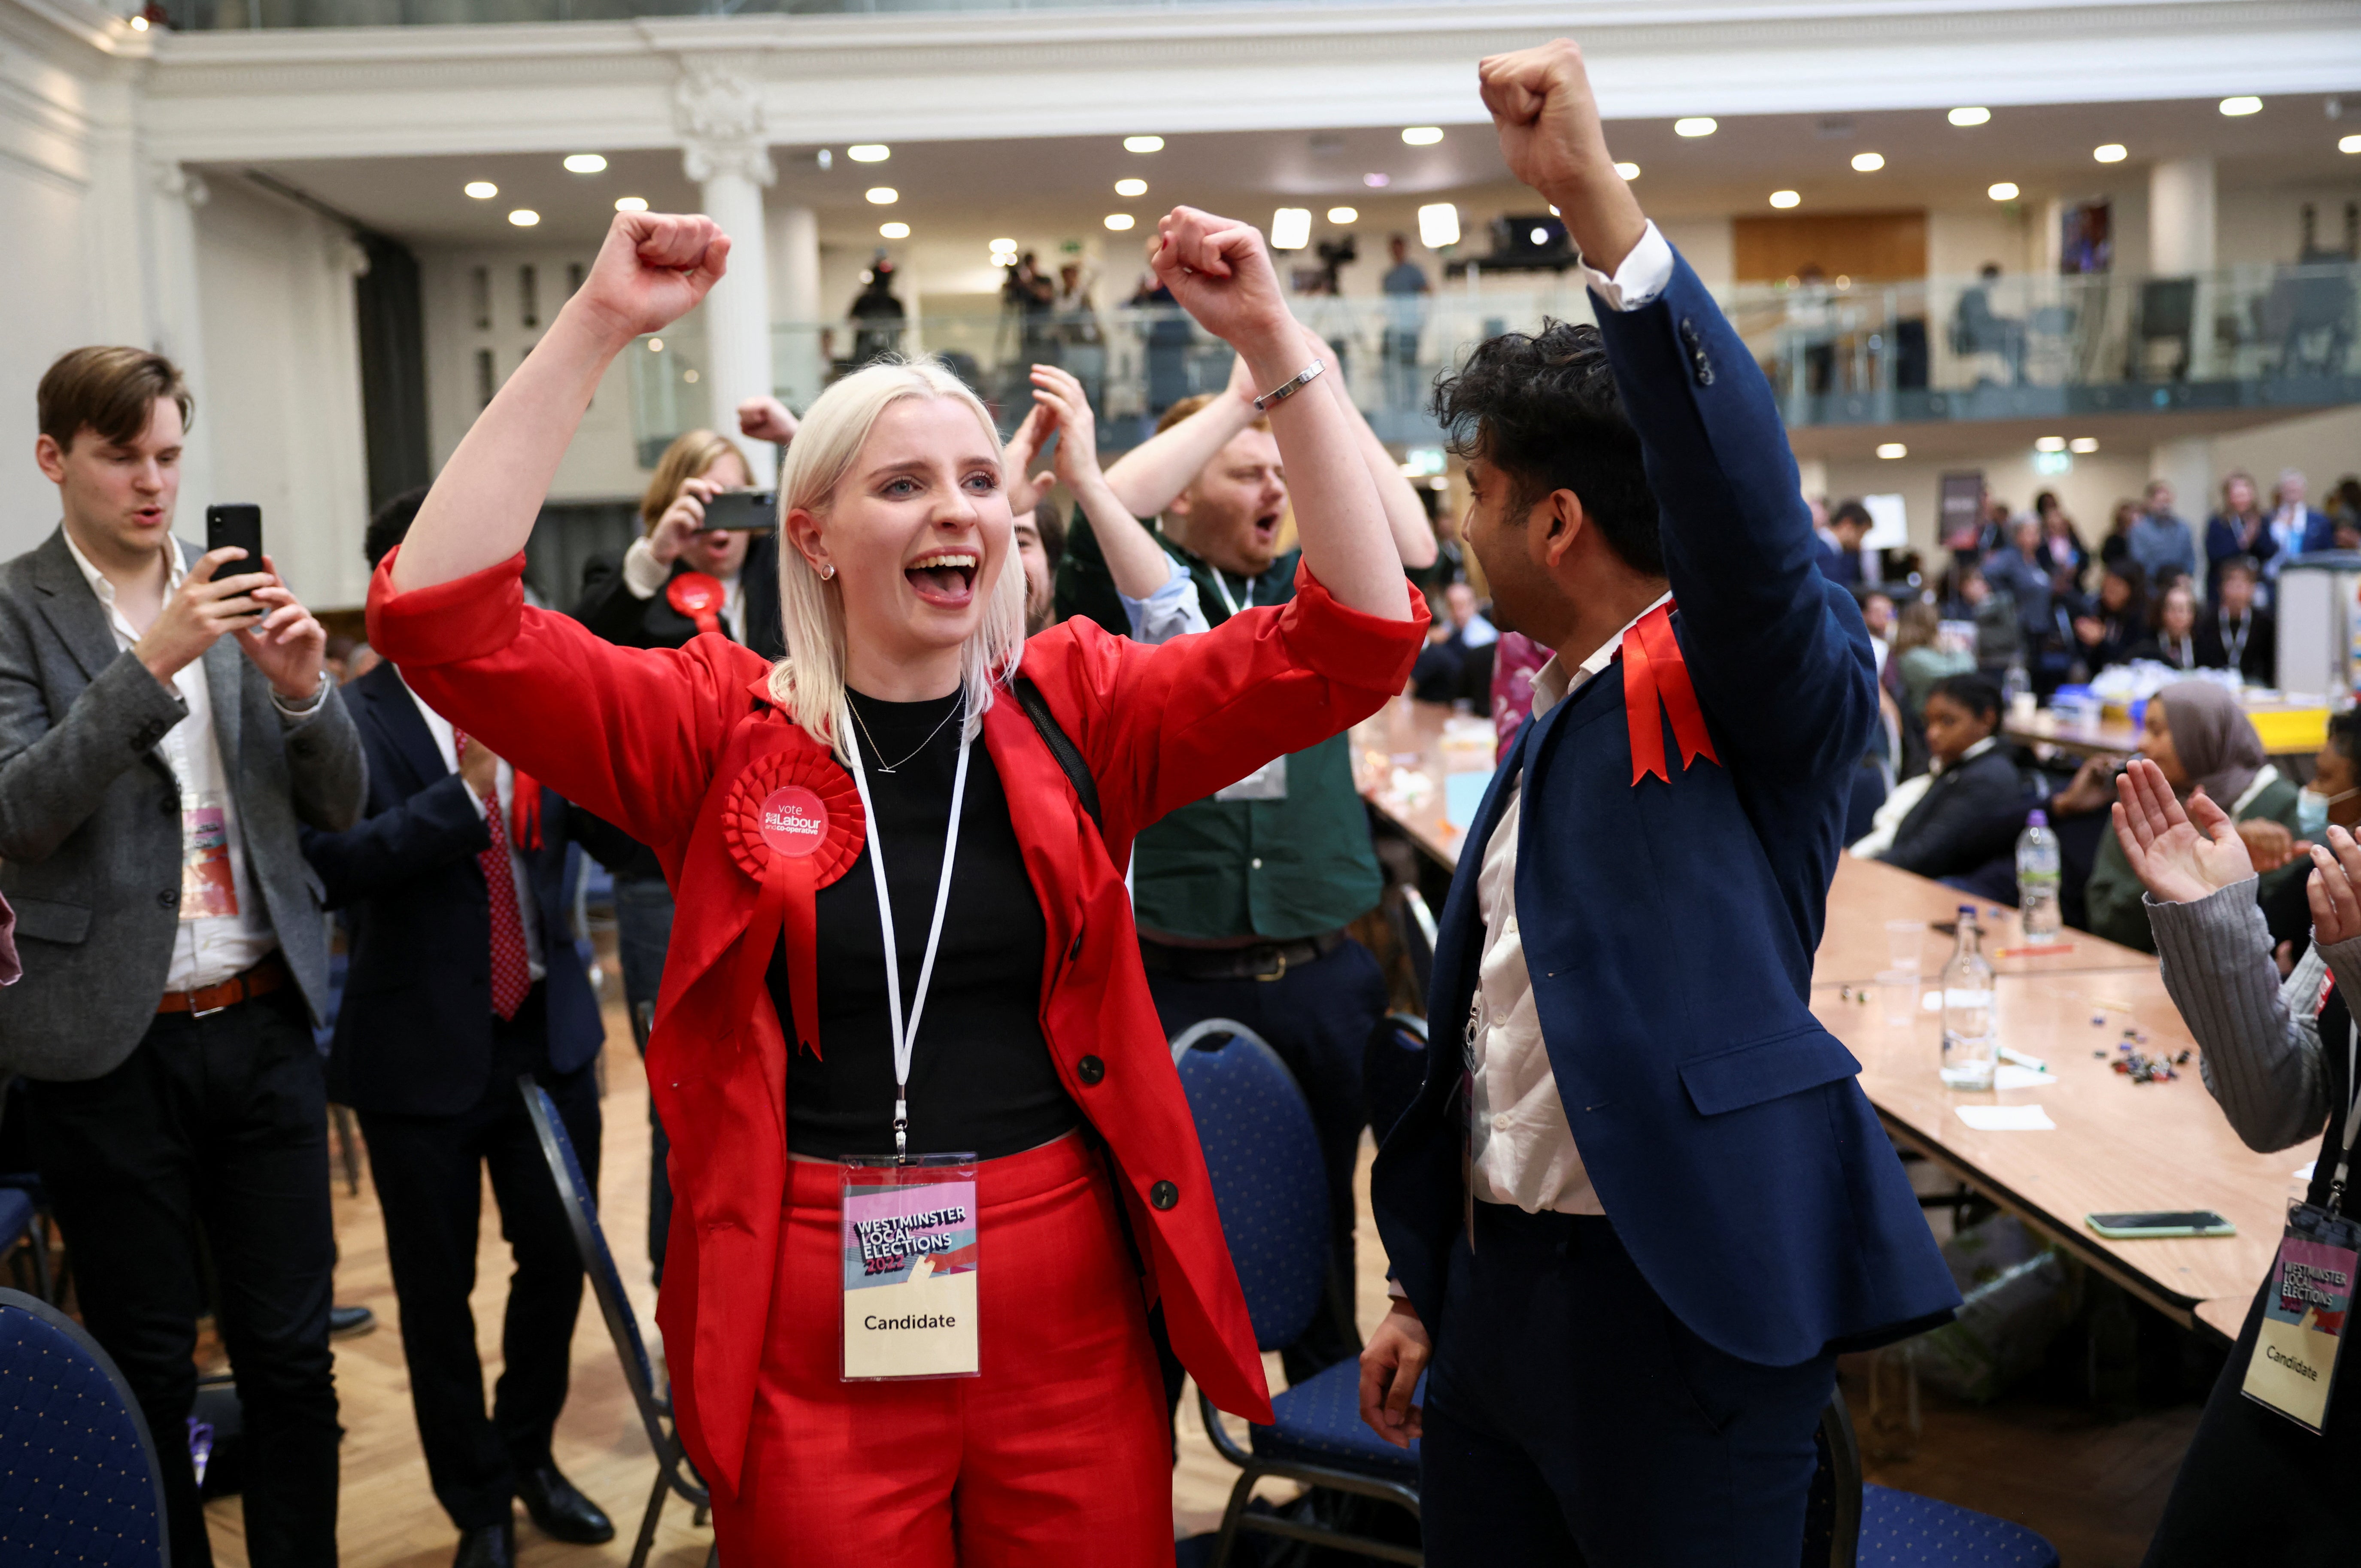 Labour Party candidates and supporters celebrate after the Labour gain of Westminster City Council